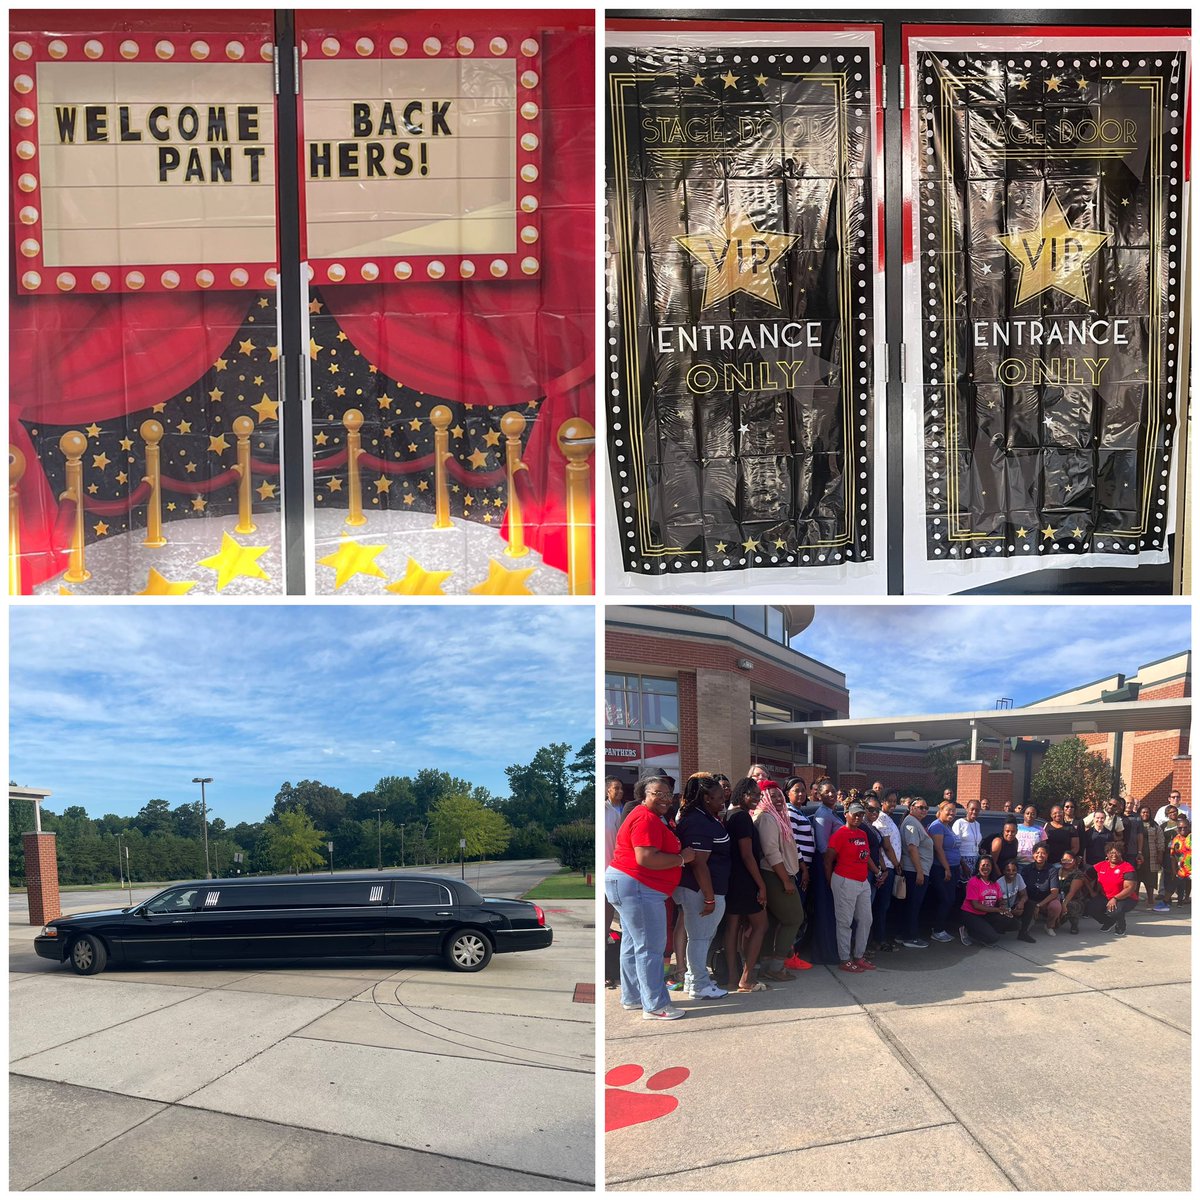 The @PaulDWestMiddle teachers received a V.I.P. “WELCOME” Back!!! It going to be an AWESOME year! @prin_pauldwest @LennetteJones @DrTamaraCandis #LetsGo